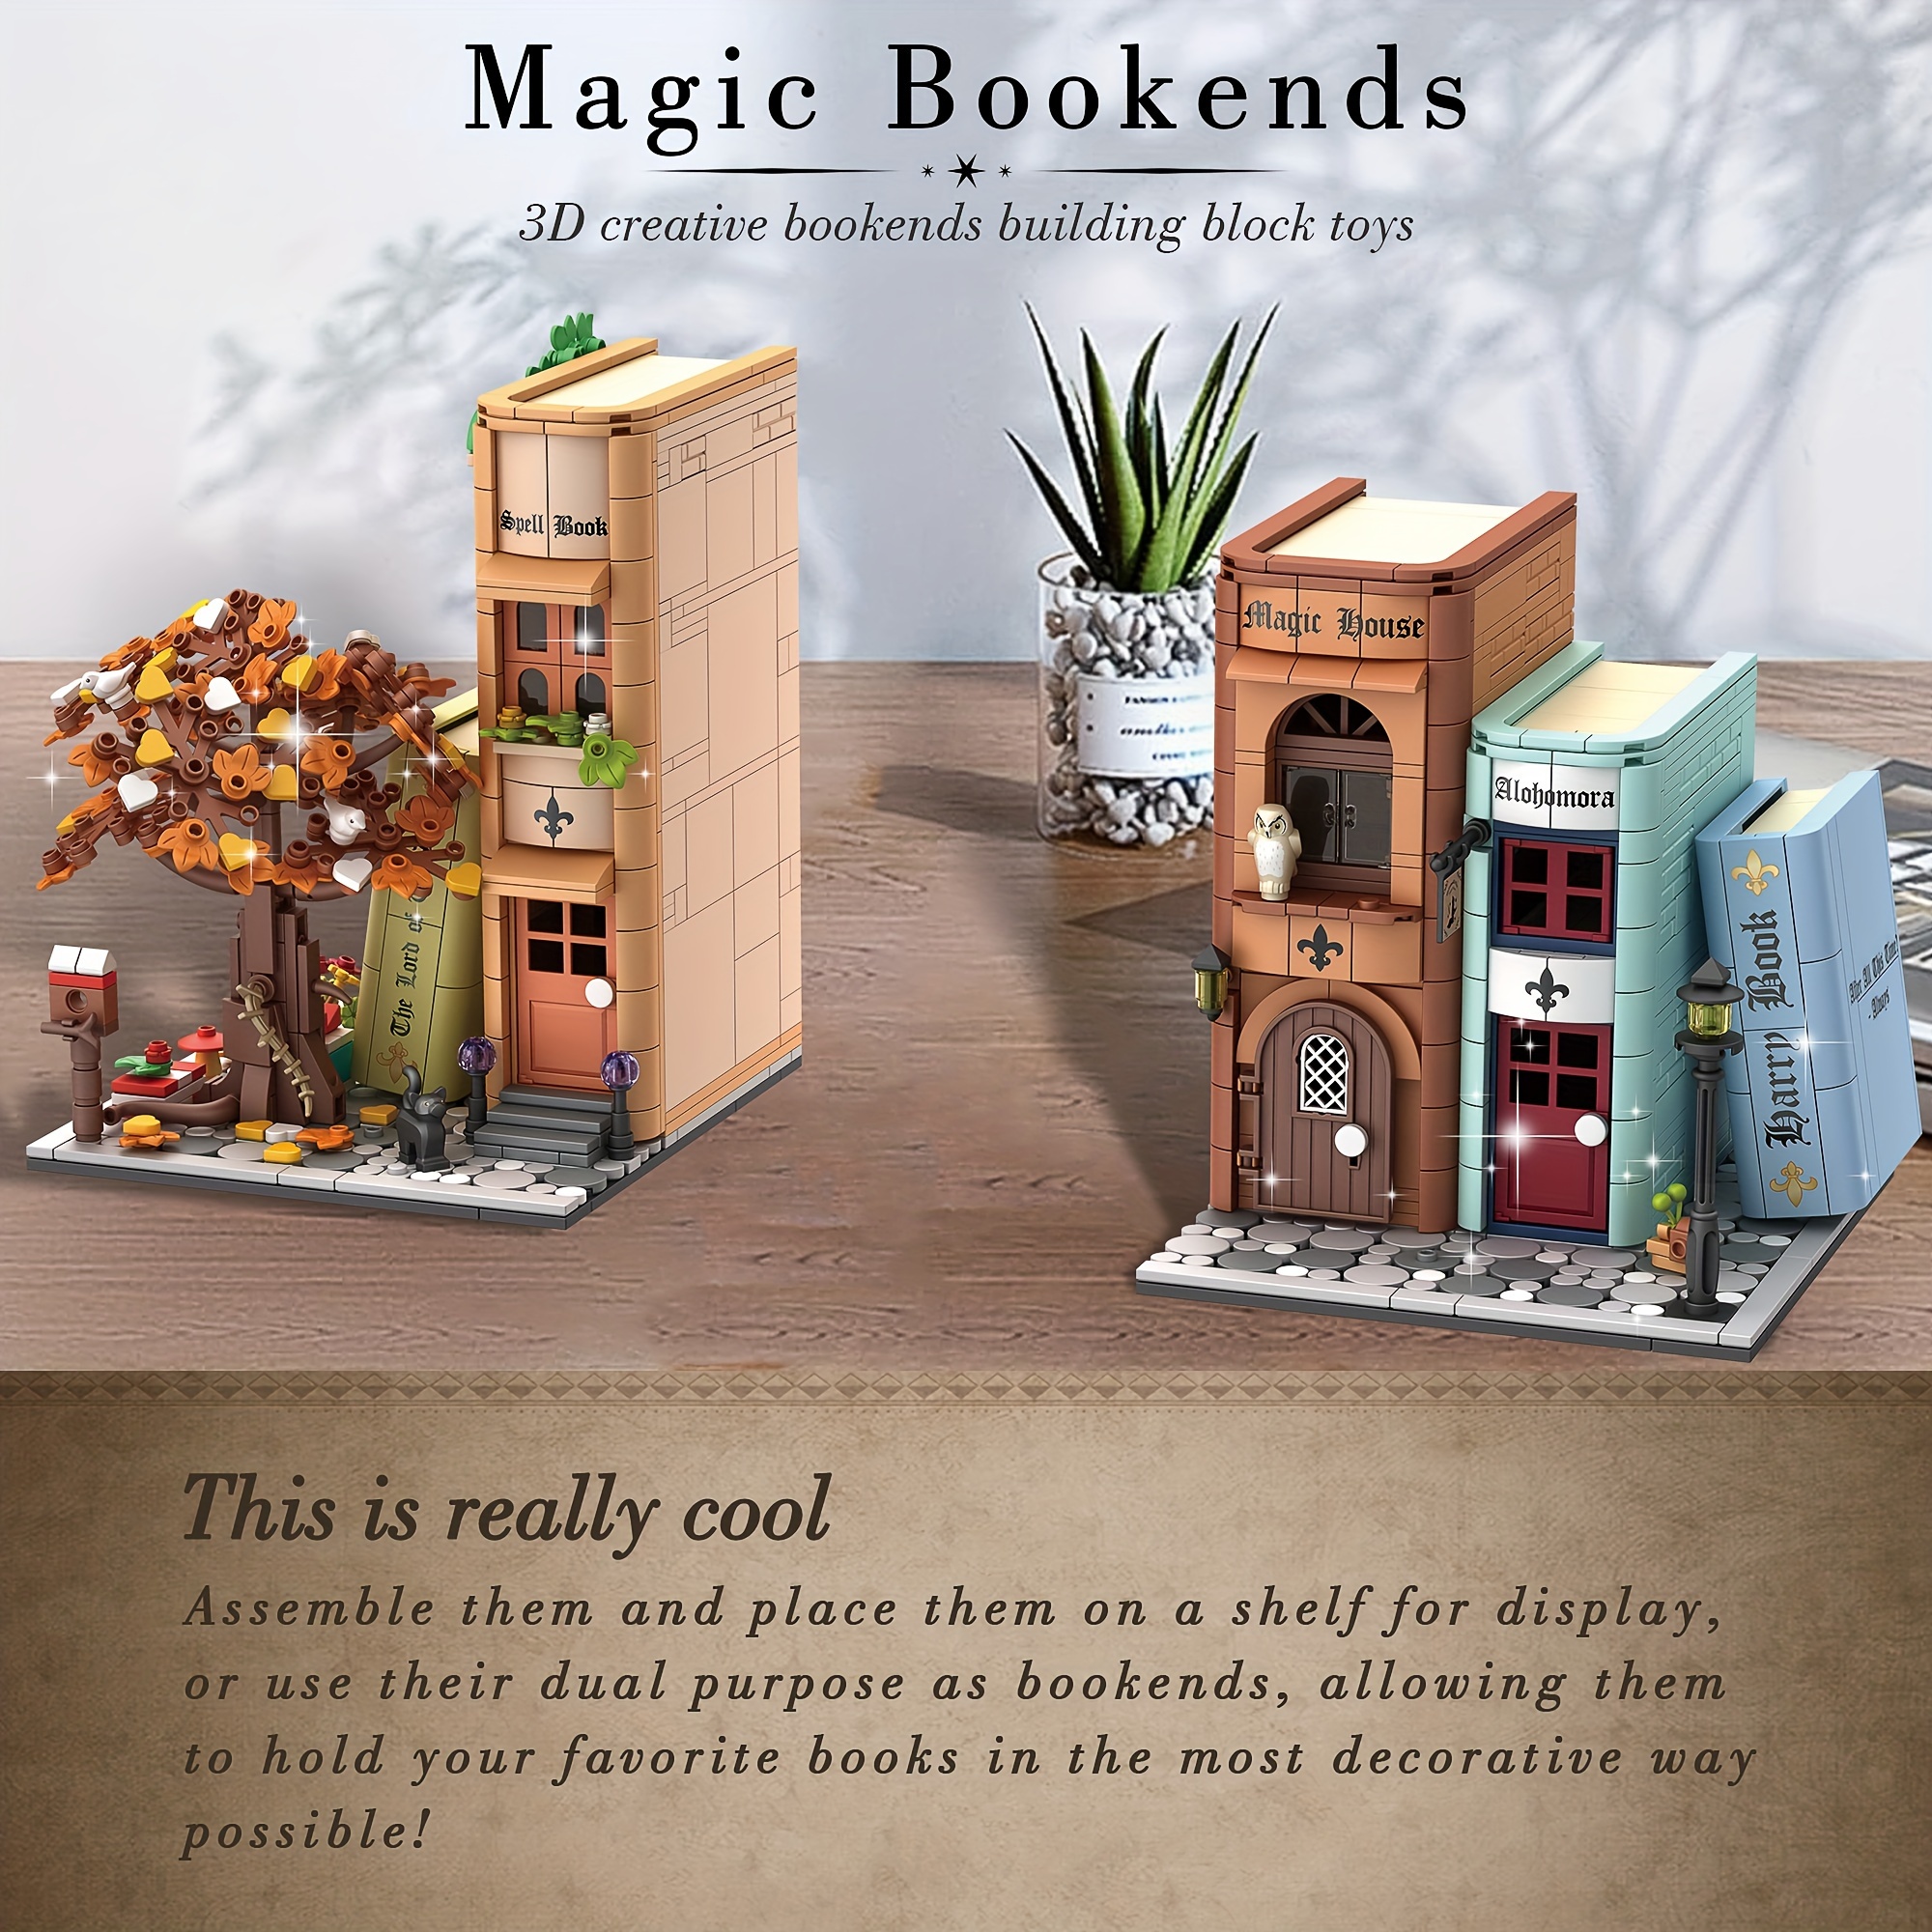 Bookend Magic House Building kit, Home Decorative Bookends for Building  Block Toy, Bookcase Miniature House Model Building, Cool Bookshelf  Organizer